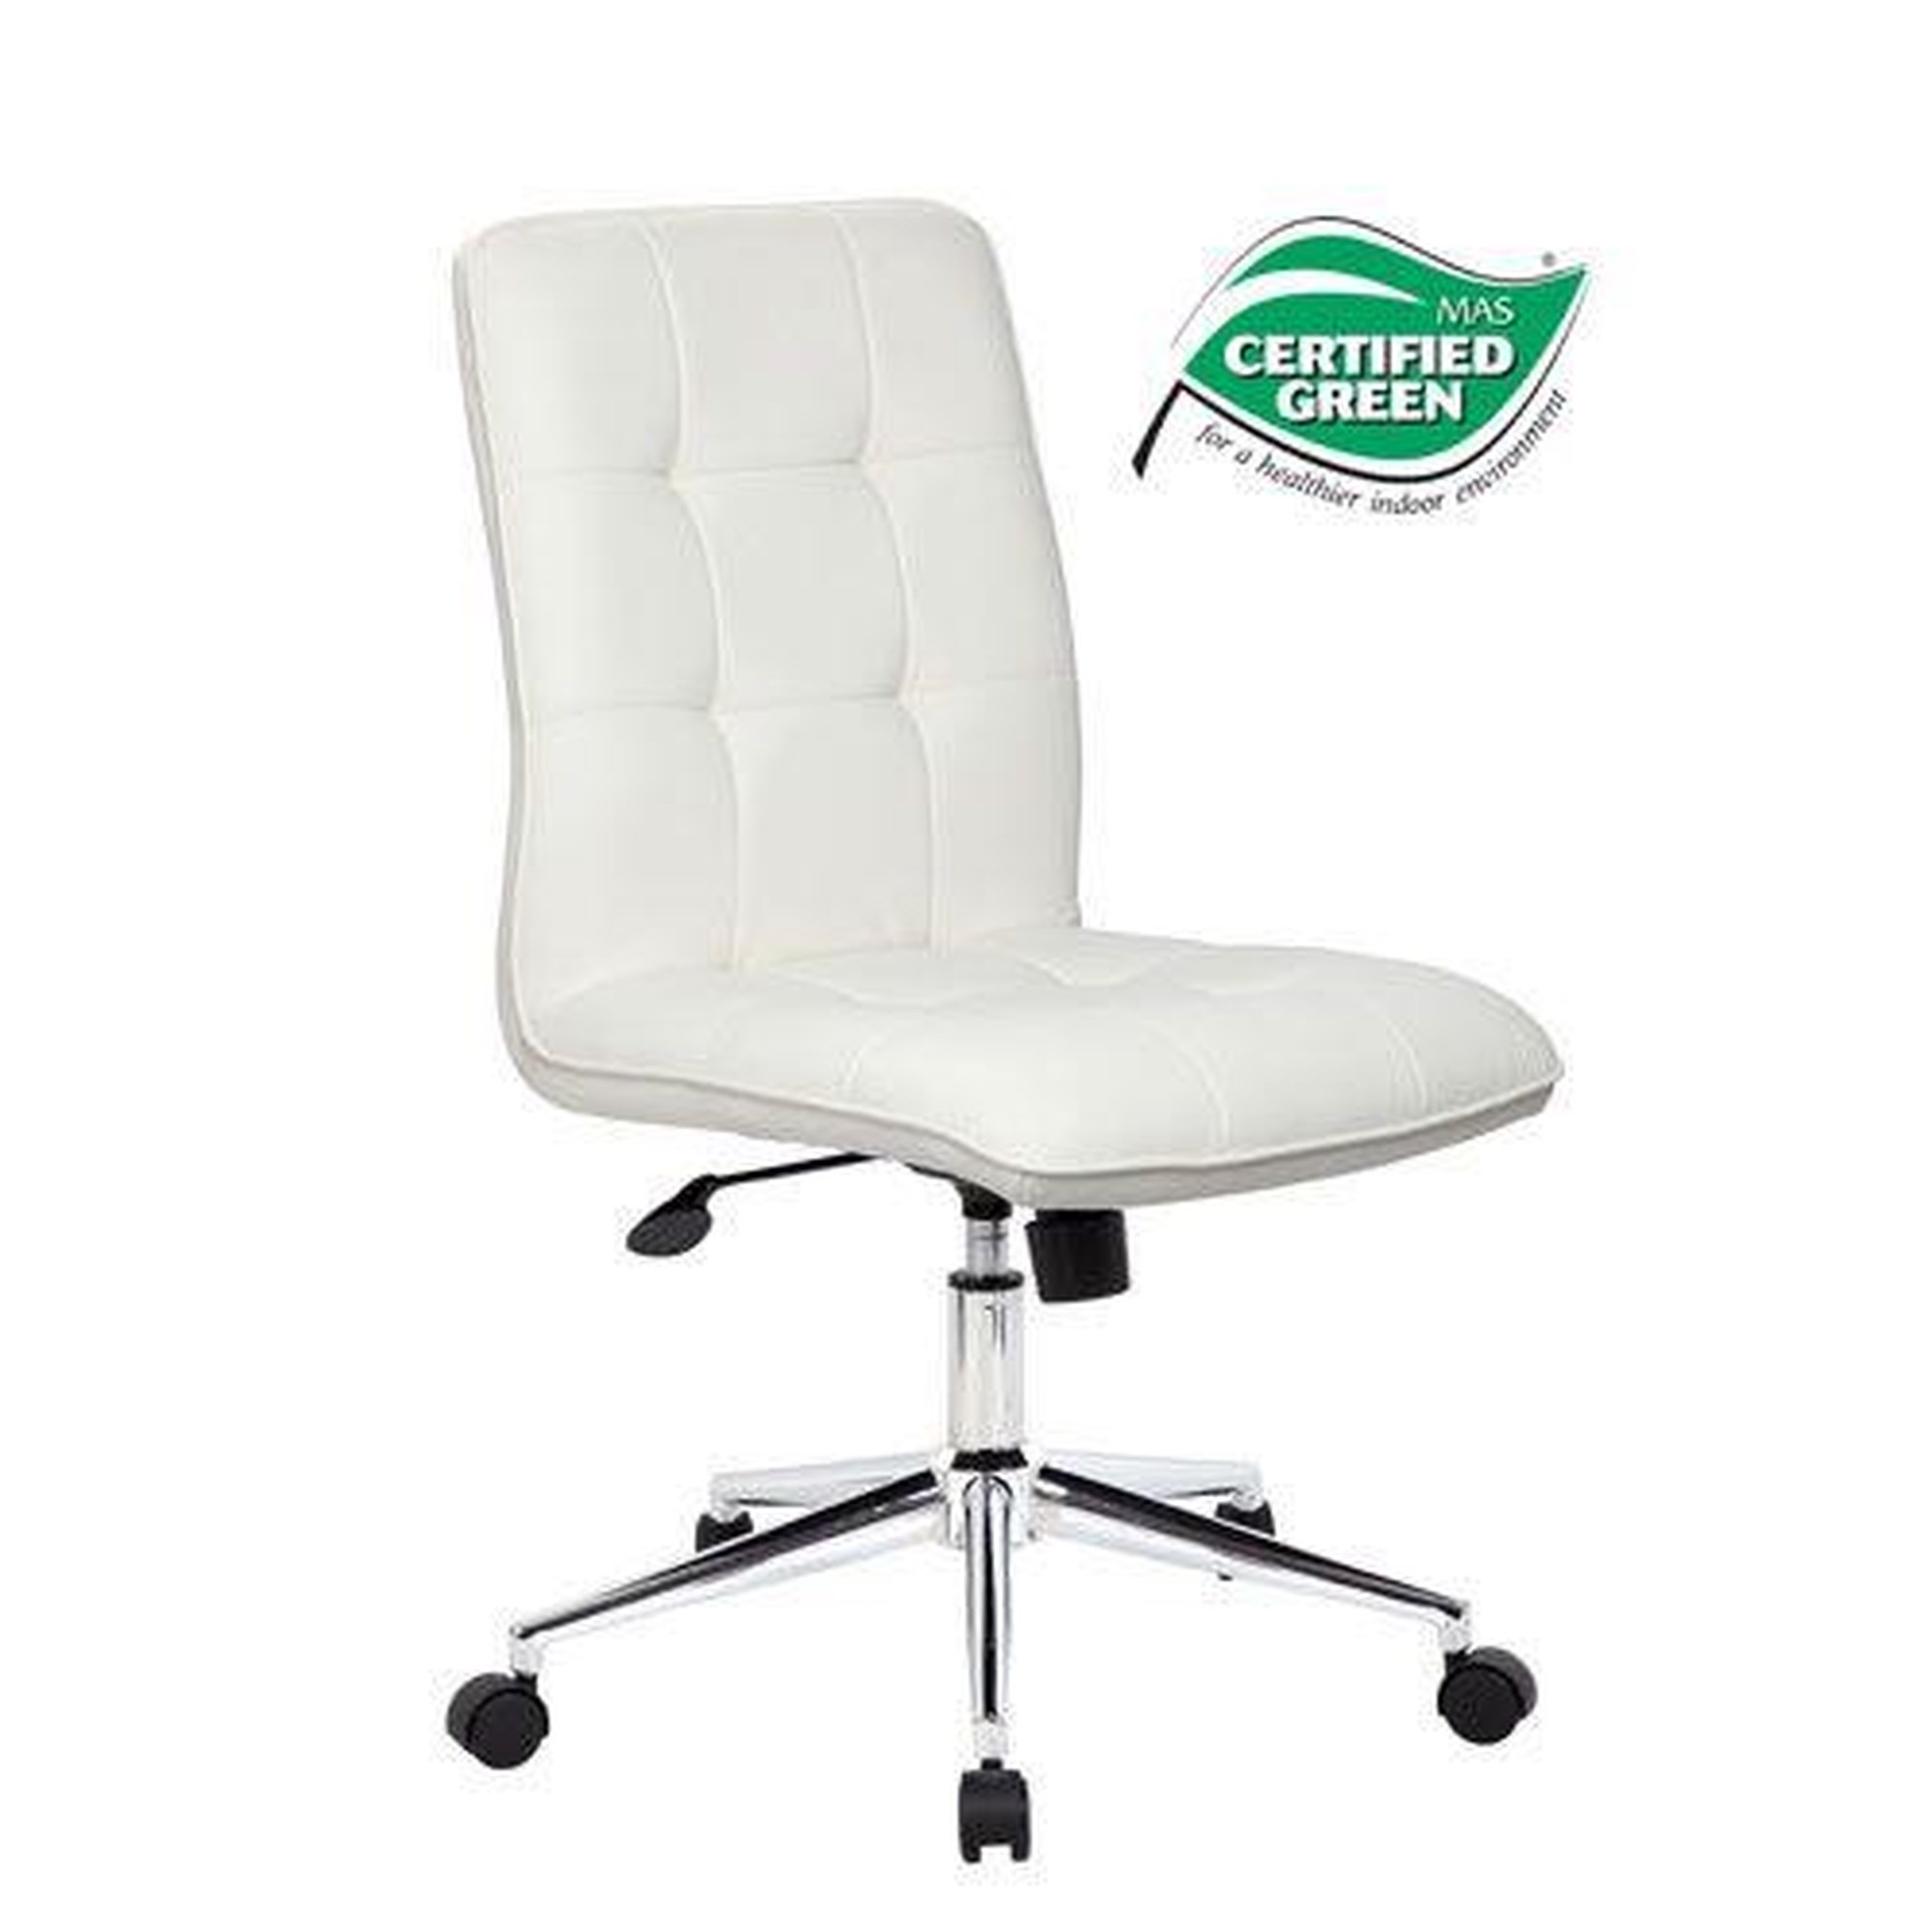 Office Chairs & Desk Chairs For Your Home Office